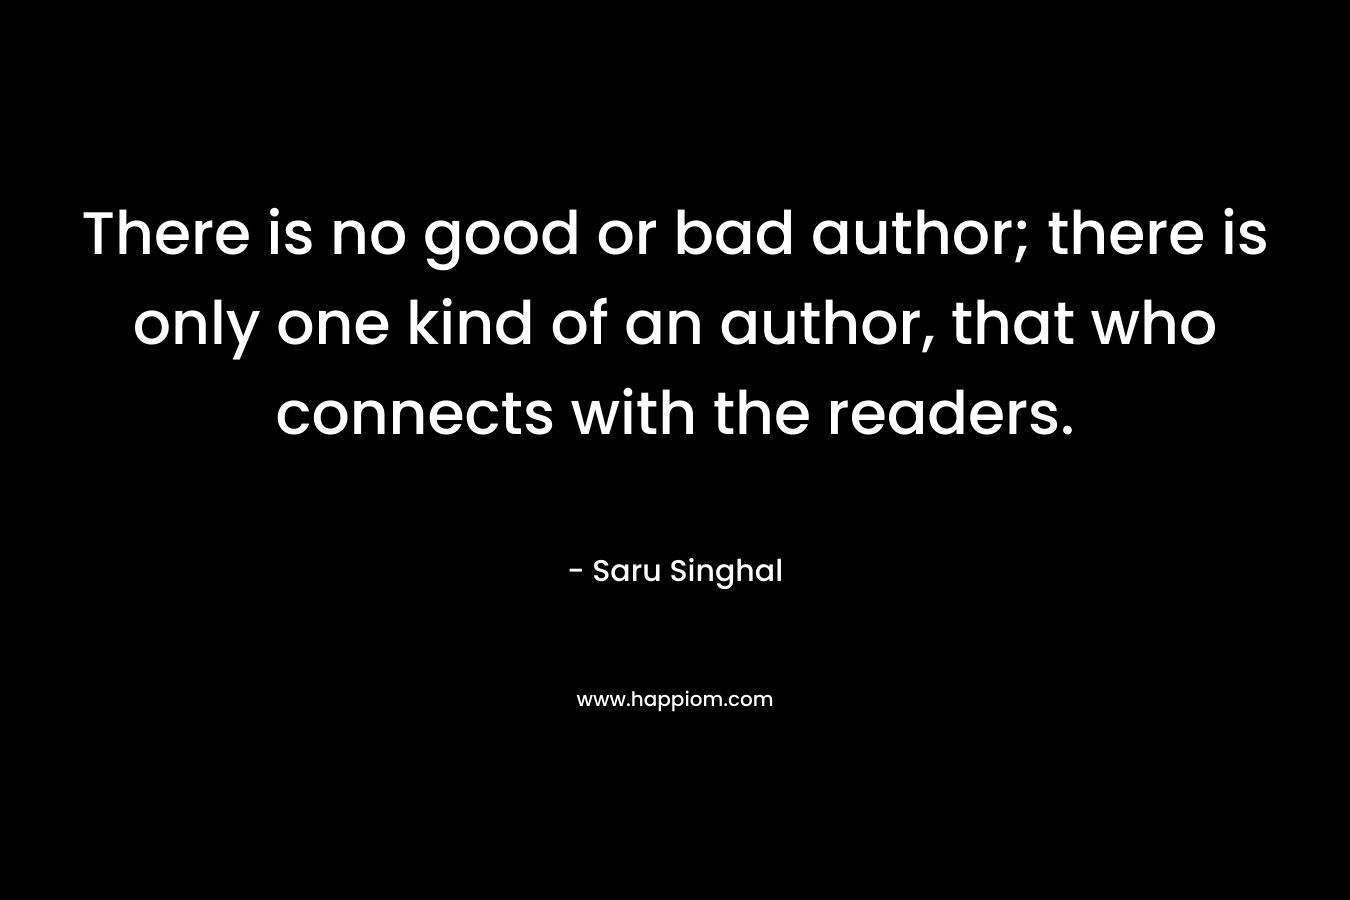 There is no good or bad author; there is only one kind of an author, that who connects with the readers. – Saru Singhal